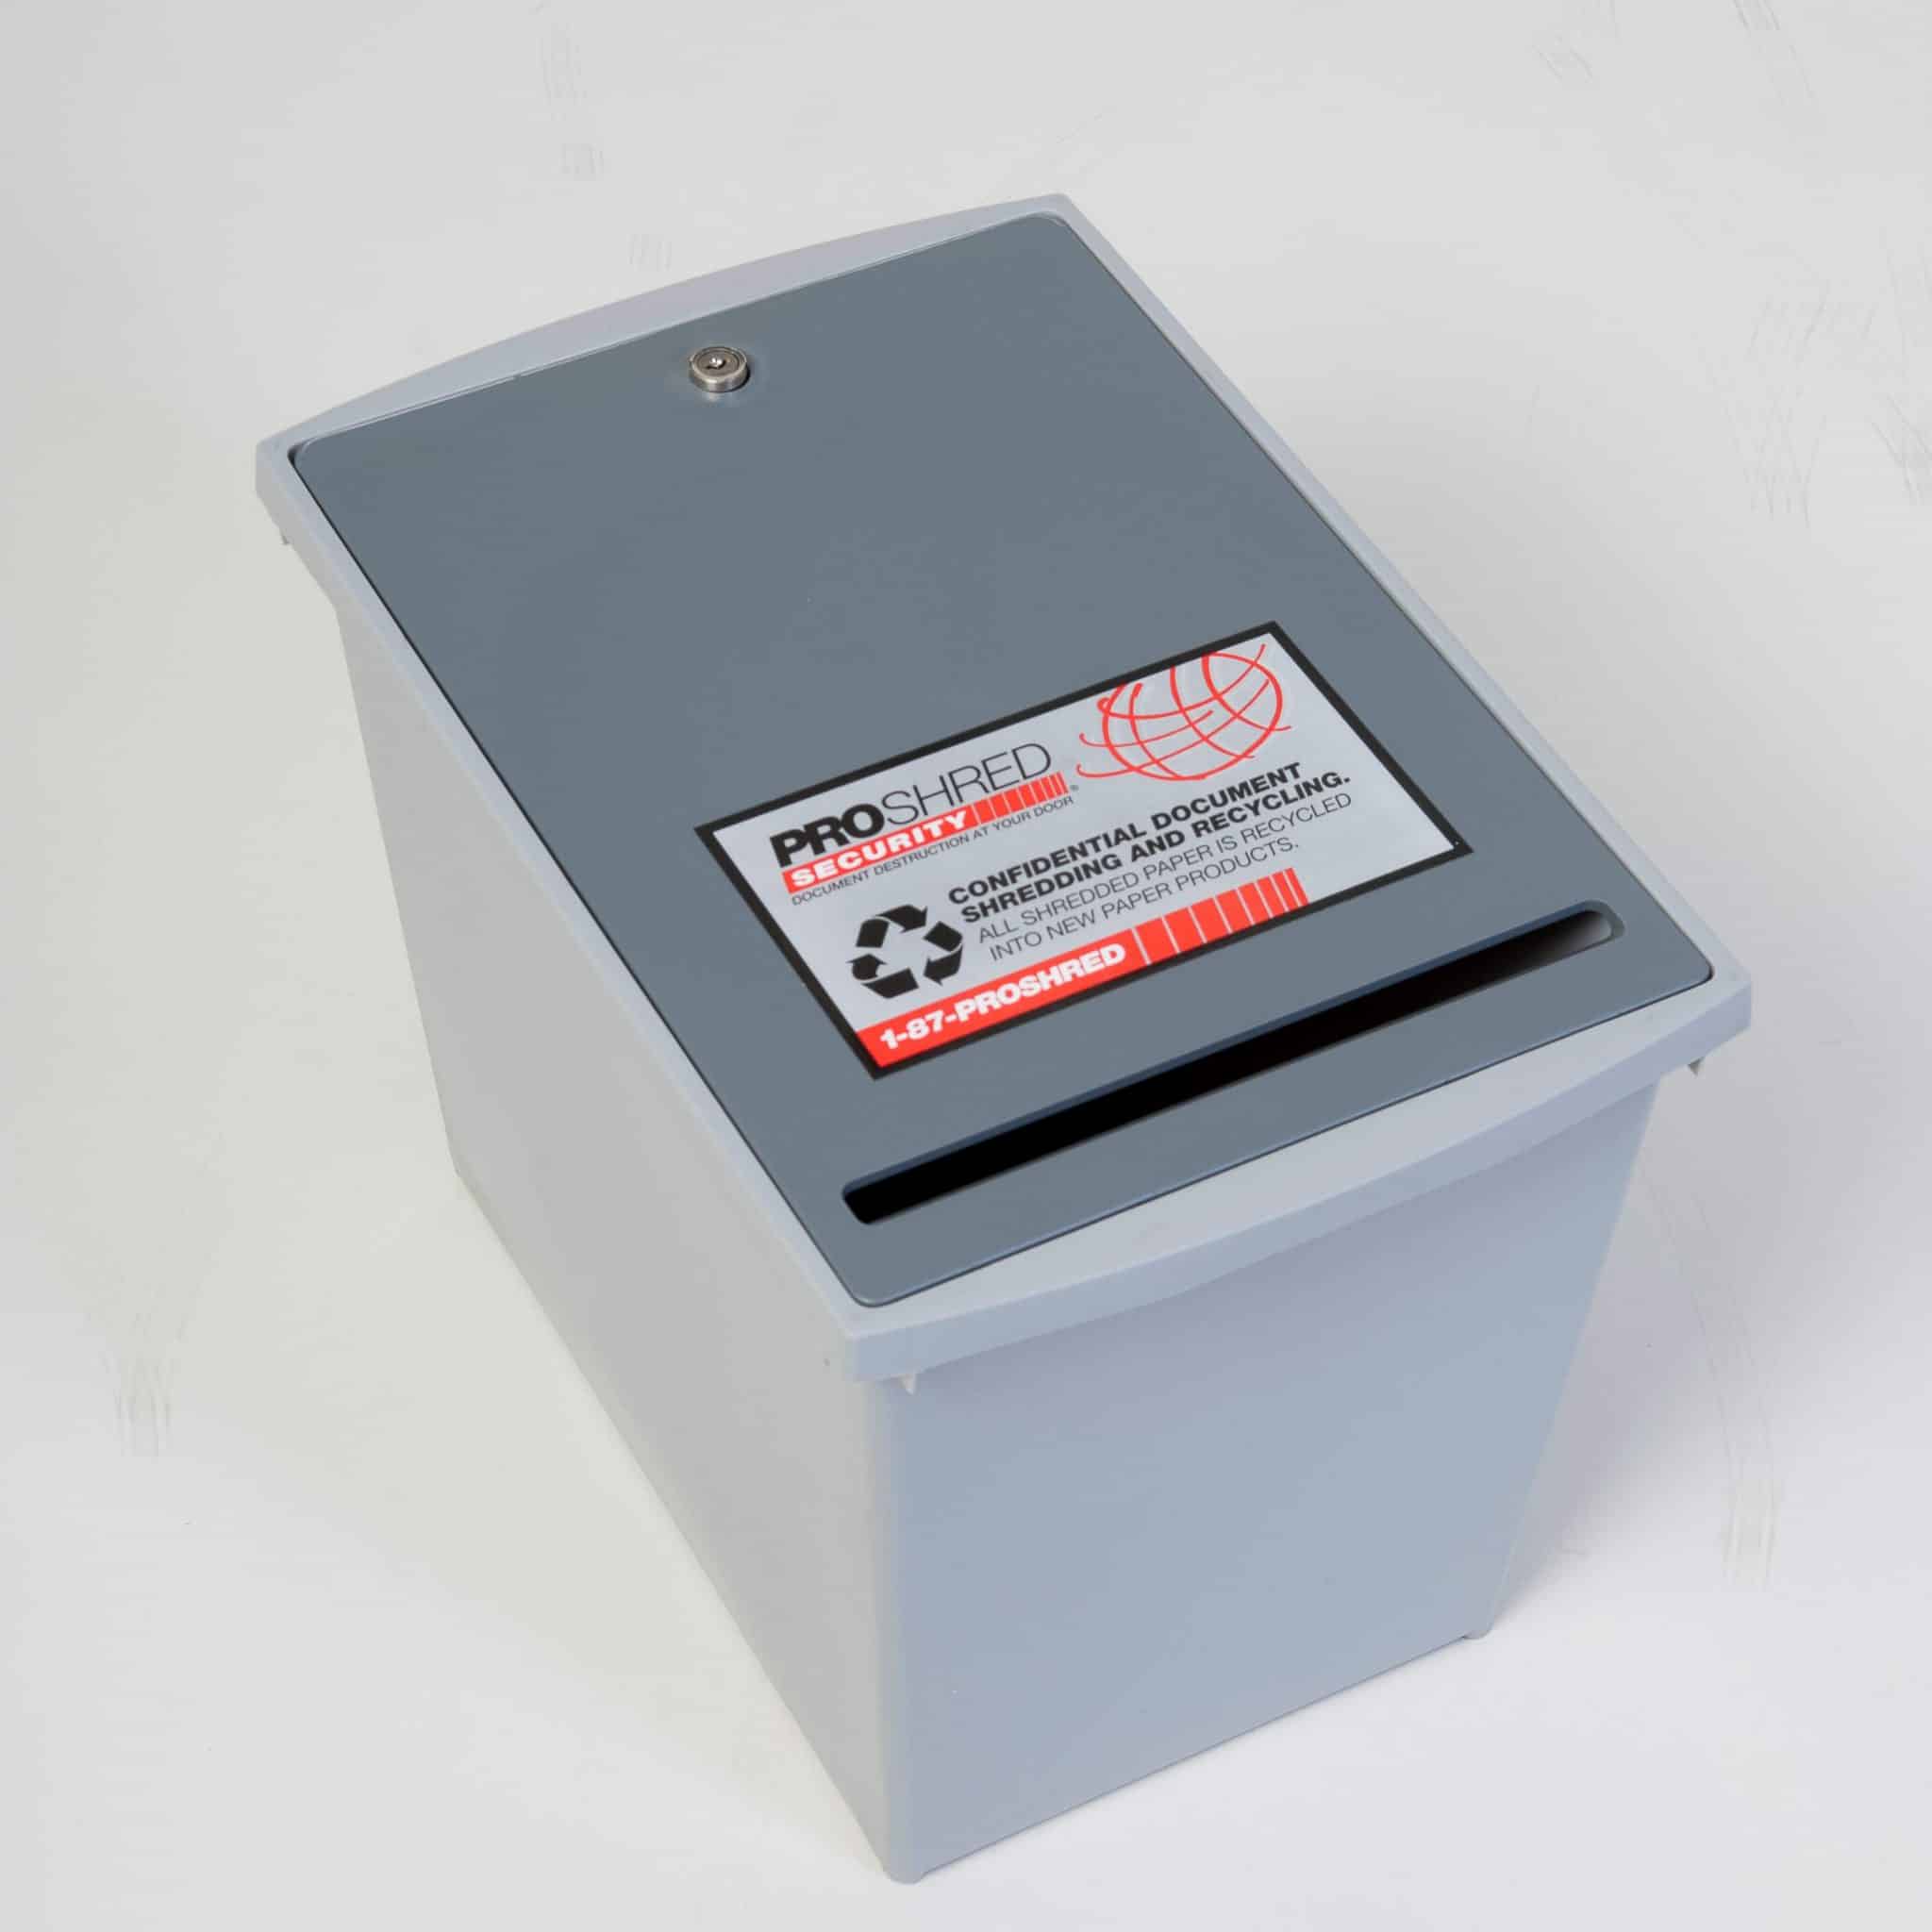 Personal desktop container (PDC) for paper shredding.